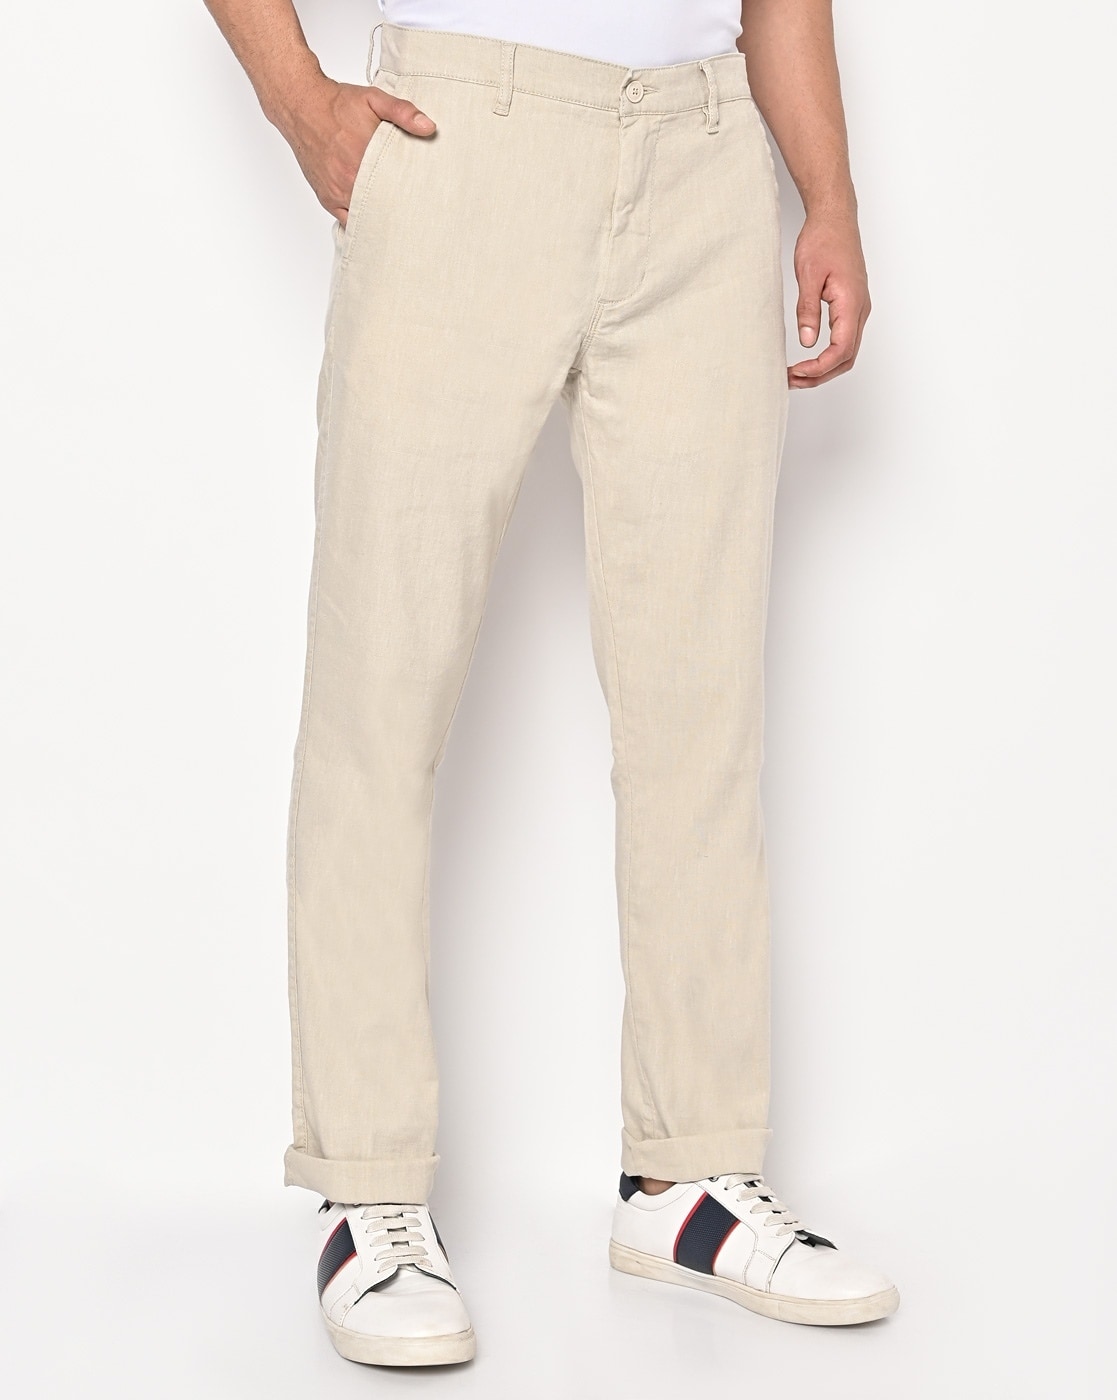 Levi's 511 Slim Fit 5 Pocket Trousers - Navy | very.co.uk